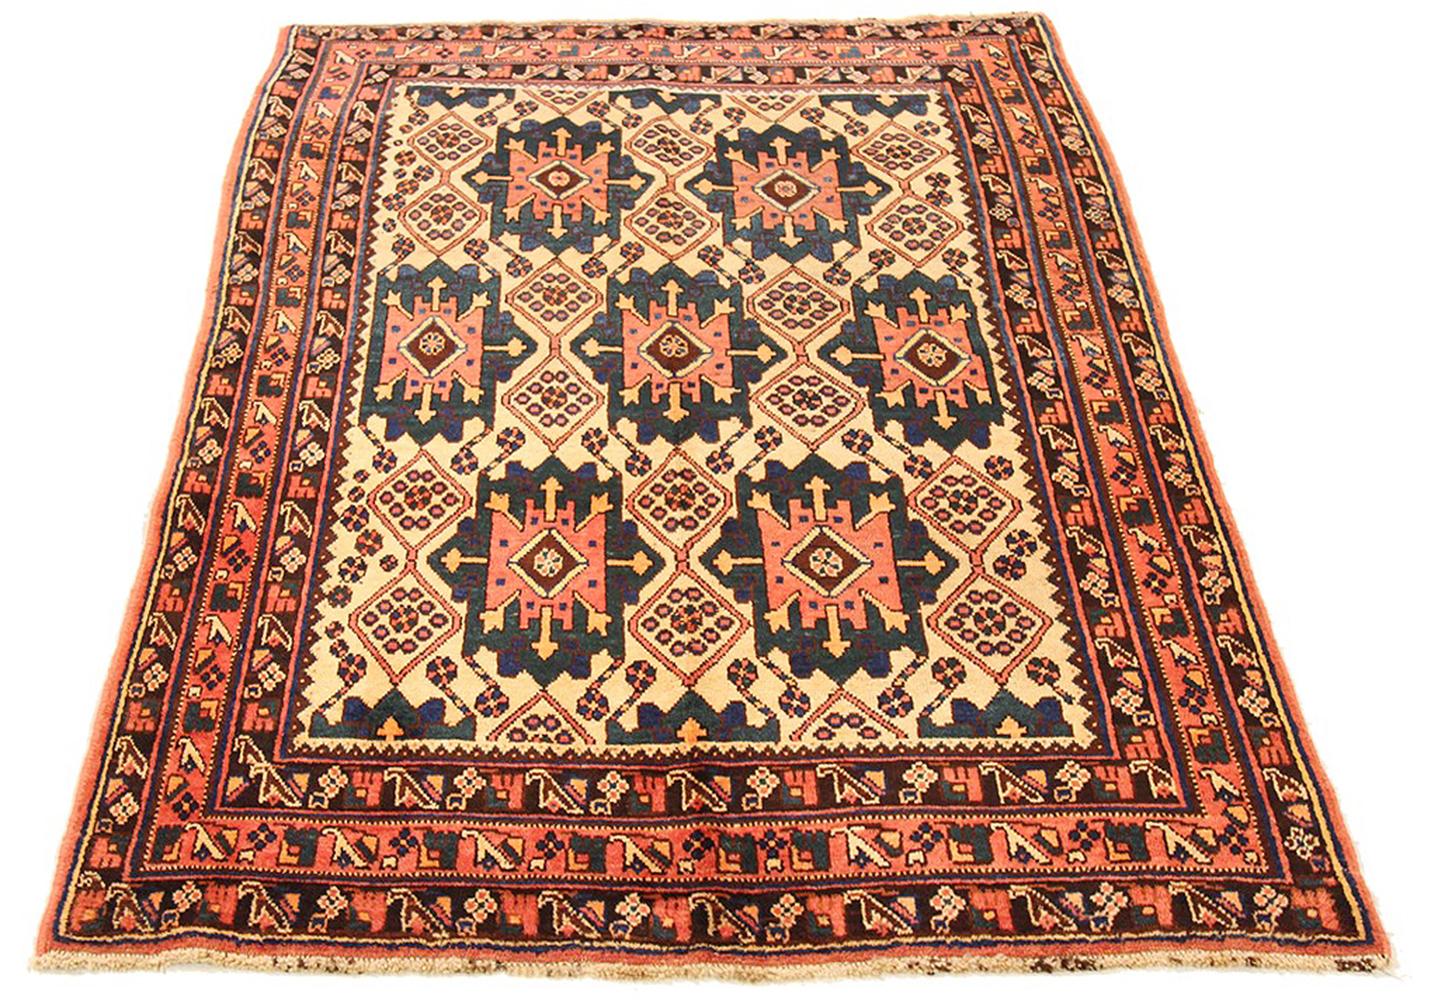 Antique Persian Sirjan rug handwoven from the finest sheep’s wool and colored with all-natural vegetable dyes that are safe for humans and pets. It’s a traditional Sirjan design featuring geometric medallion details in black and red over an ivory